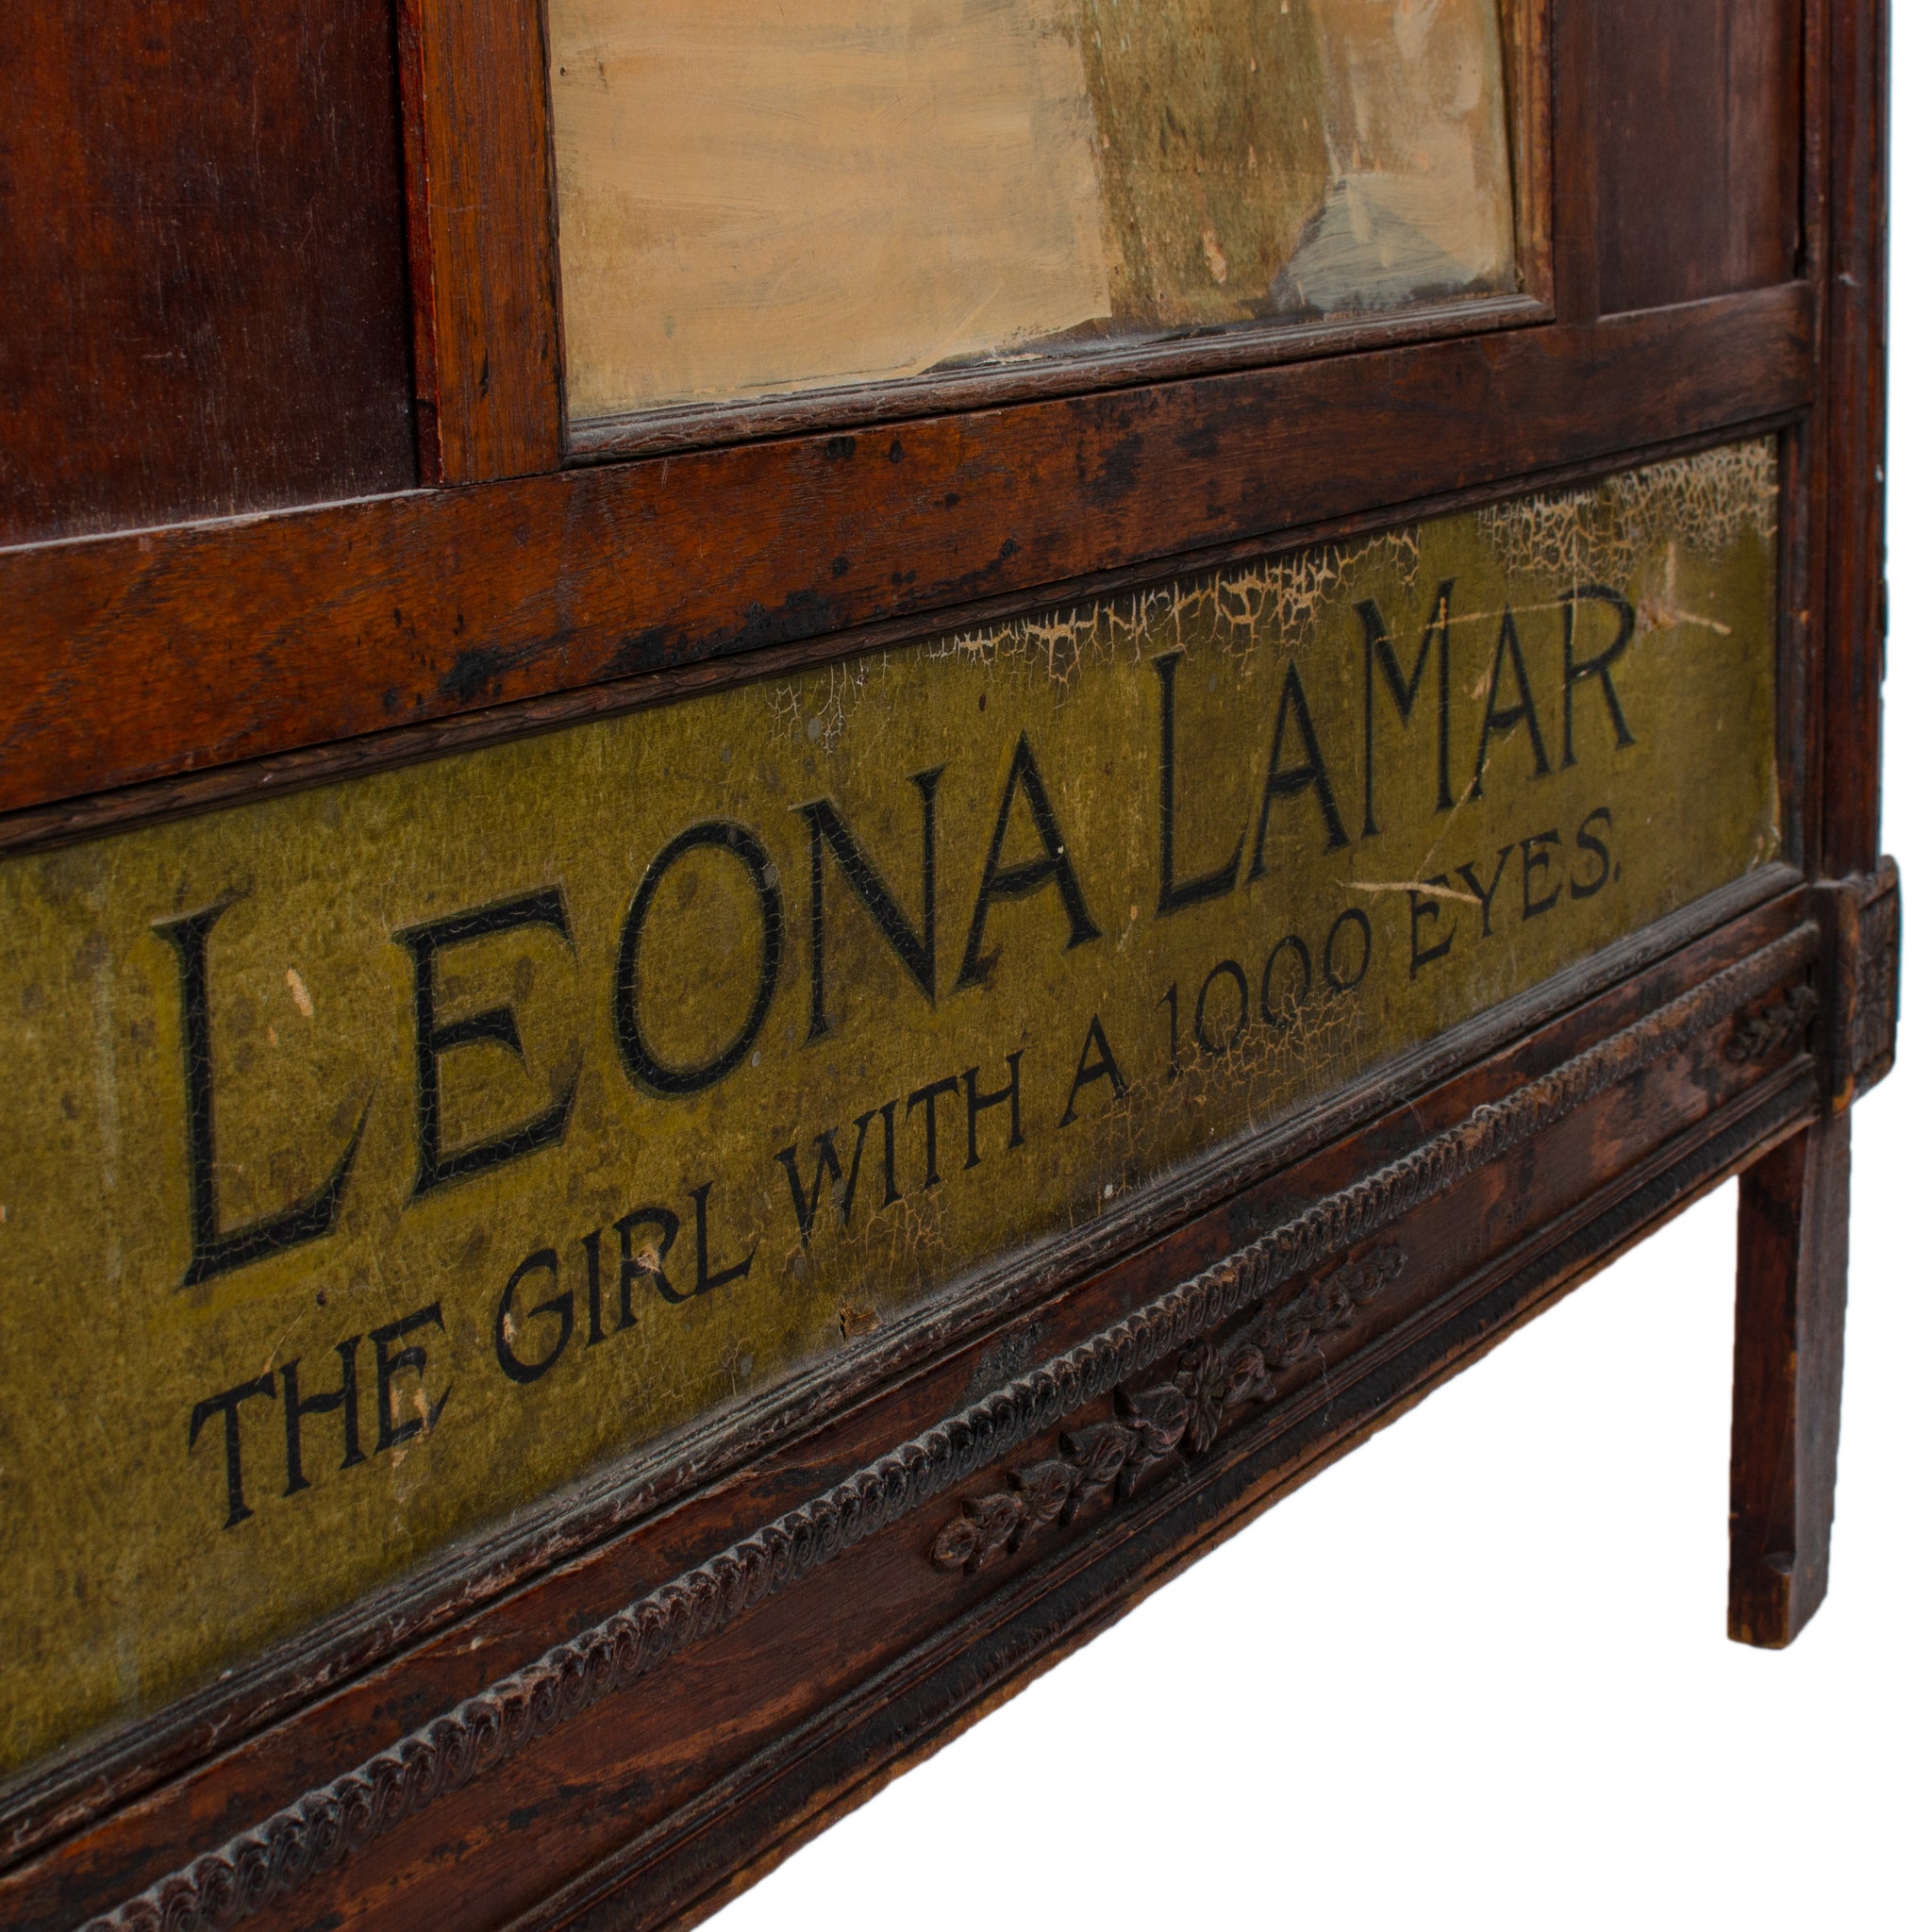 Leona LaMar “The Girl With a 1000 Eyes” Vaudeville Mentalist Lobby Marquee